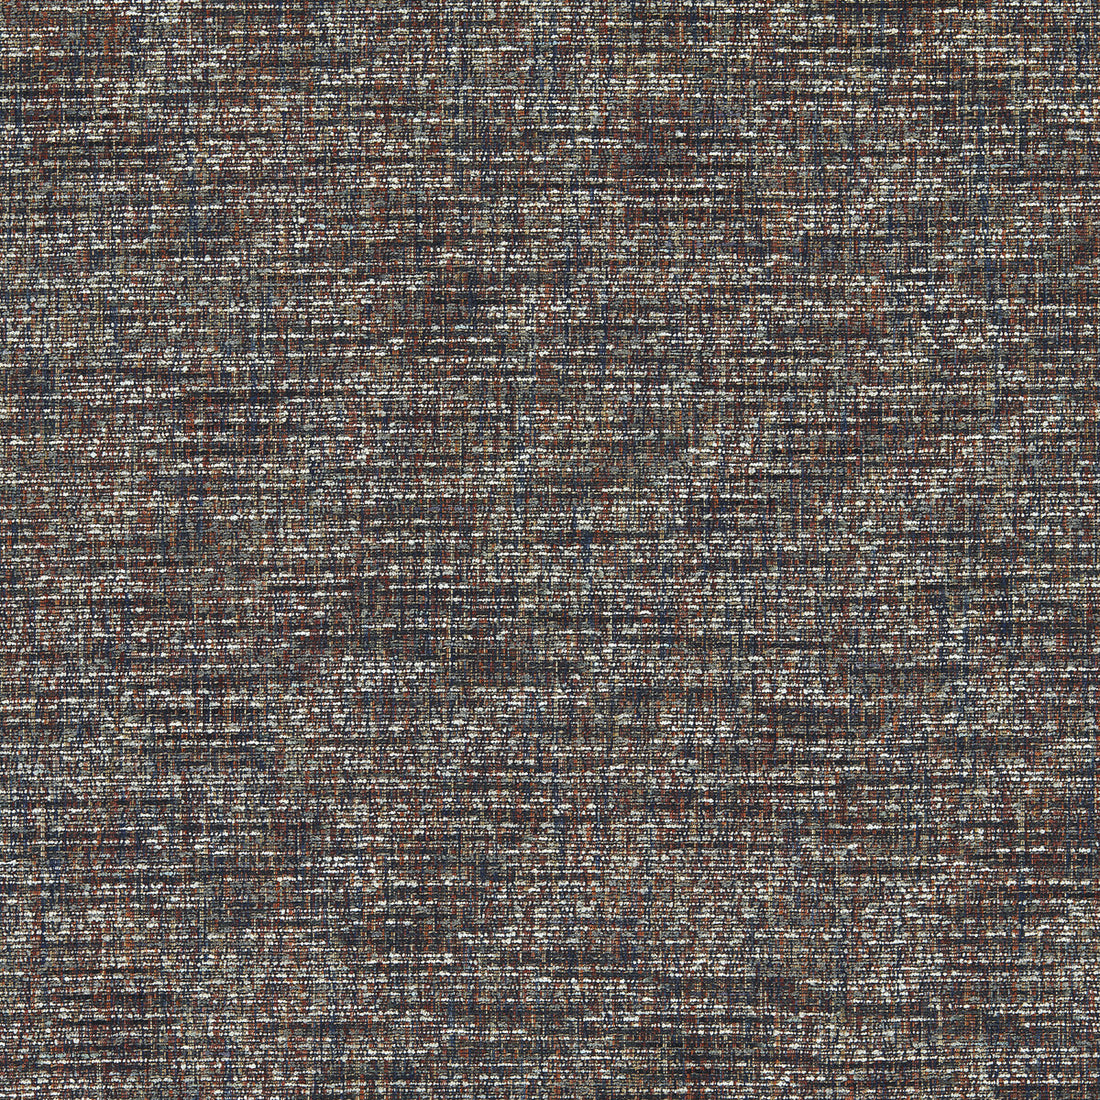 Cetara fabric in winter color - pattern F1642/21.CAC.0 - by Clarke And Clarke in the Cetara collection